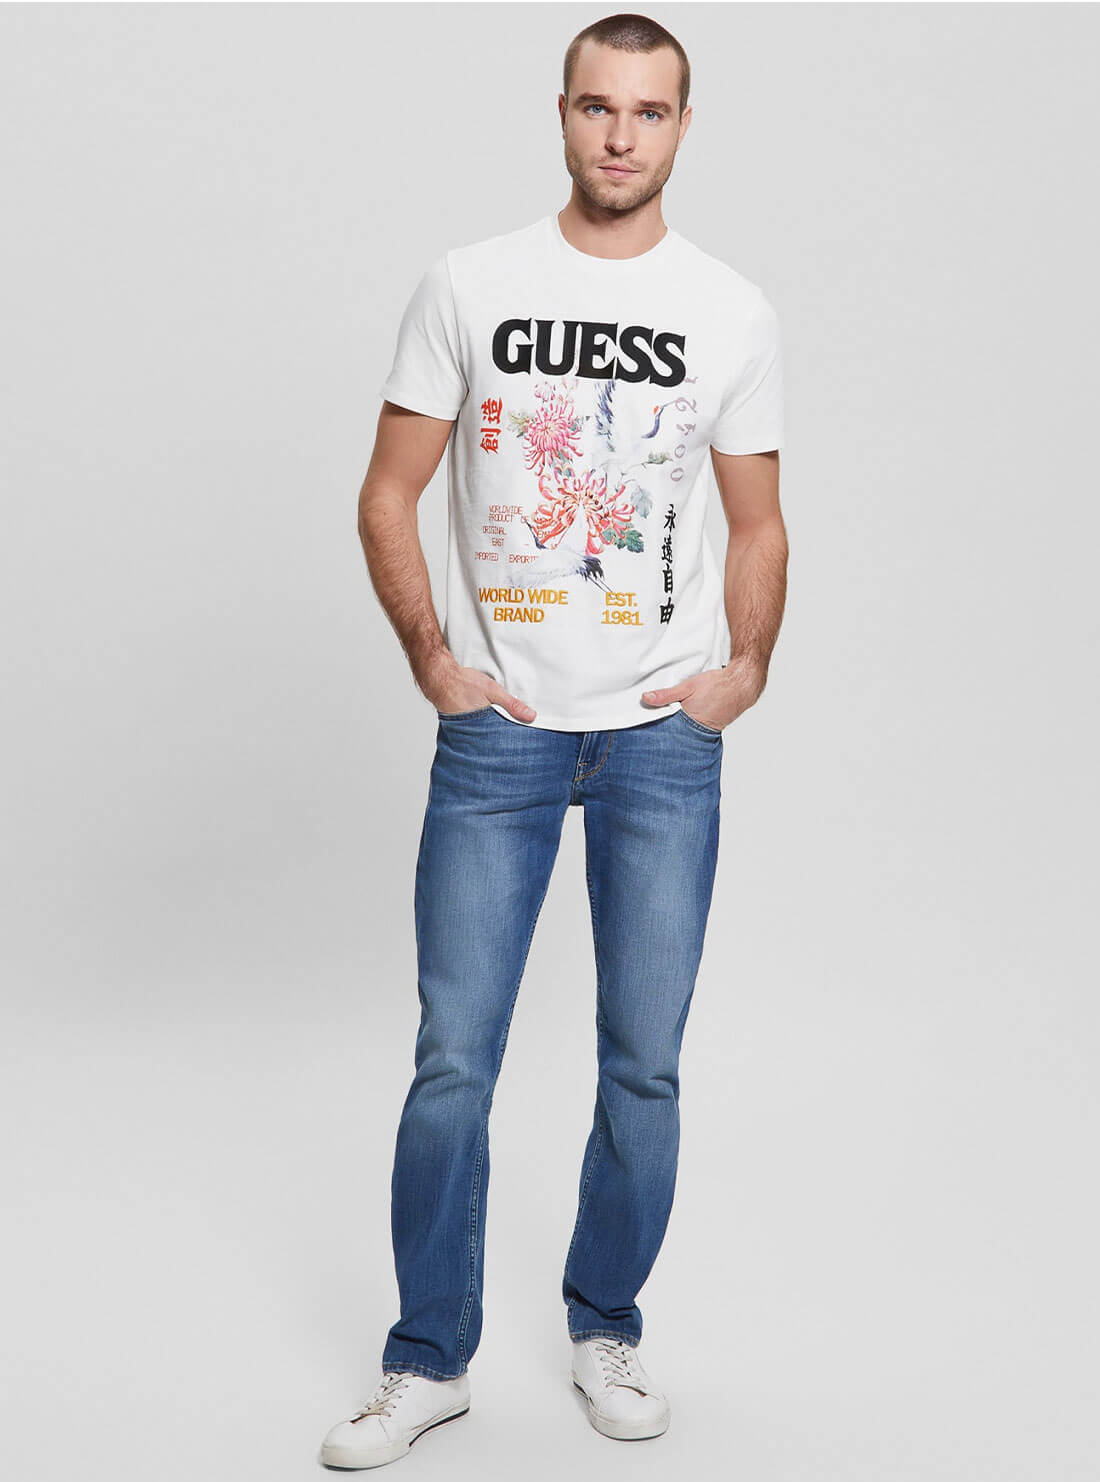 White Tokyo Collage T-Shirt | GUESS Men's Apparel | full view